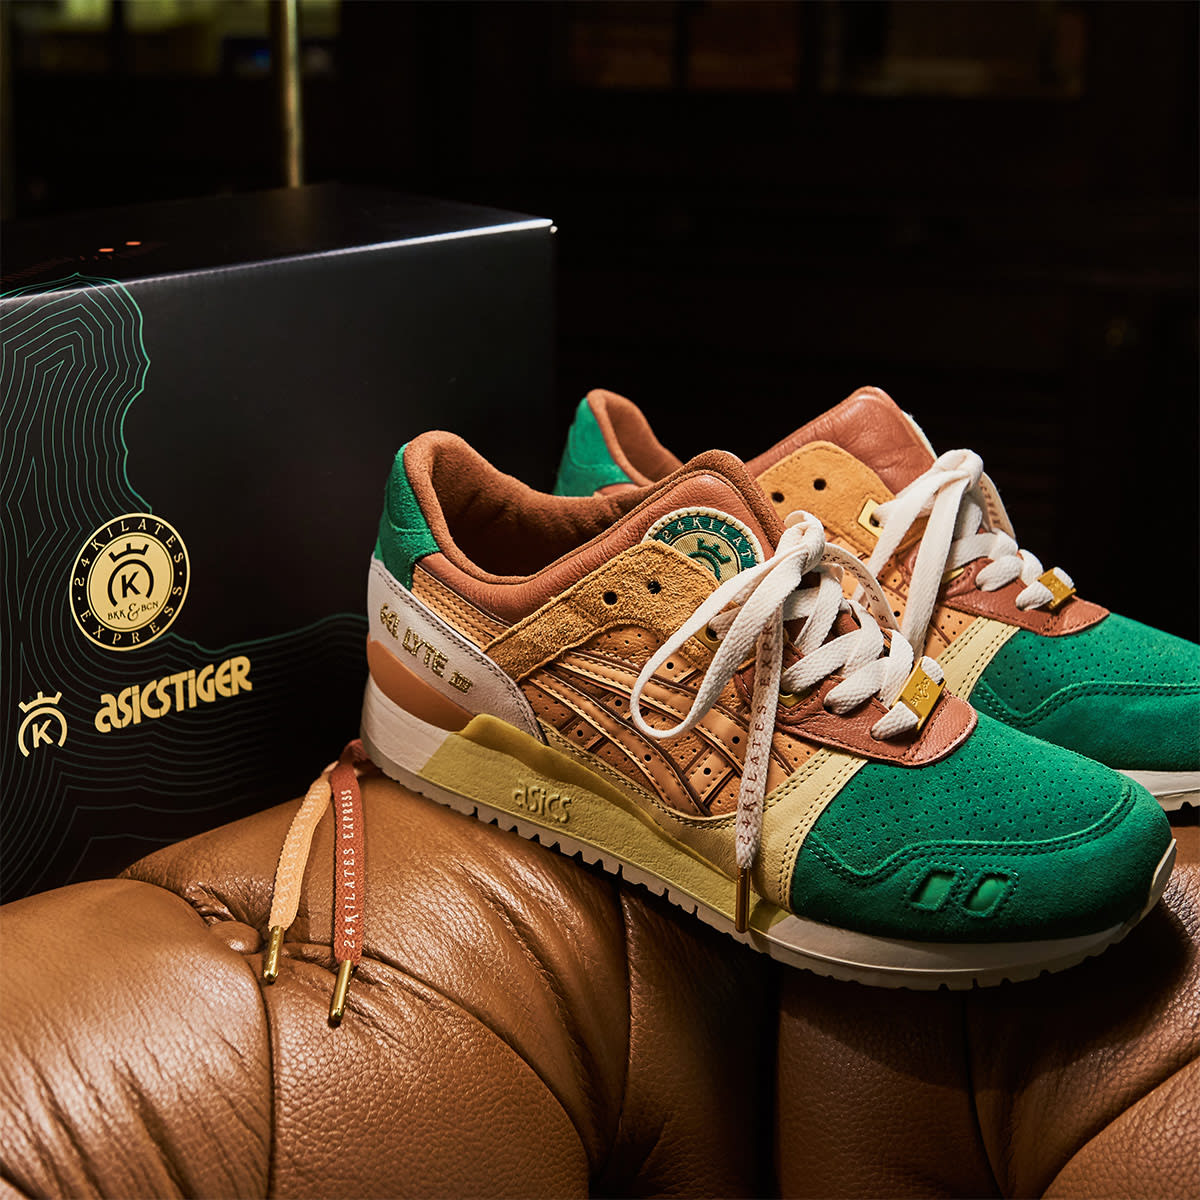 Asics x 24 Kilates Gel Lyte III 'Express' (Green & Gold) | END. Launches